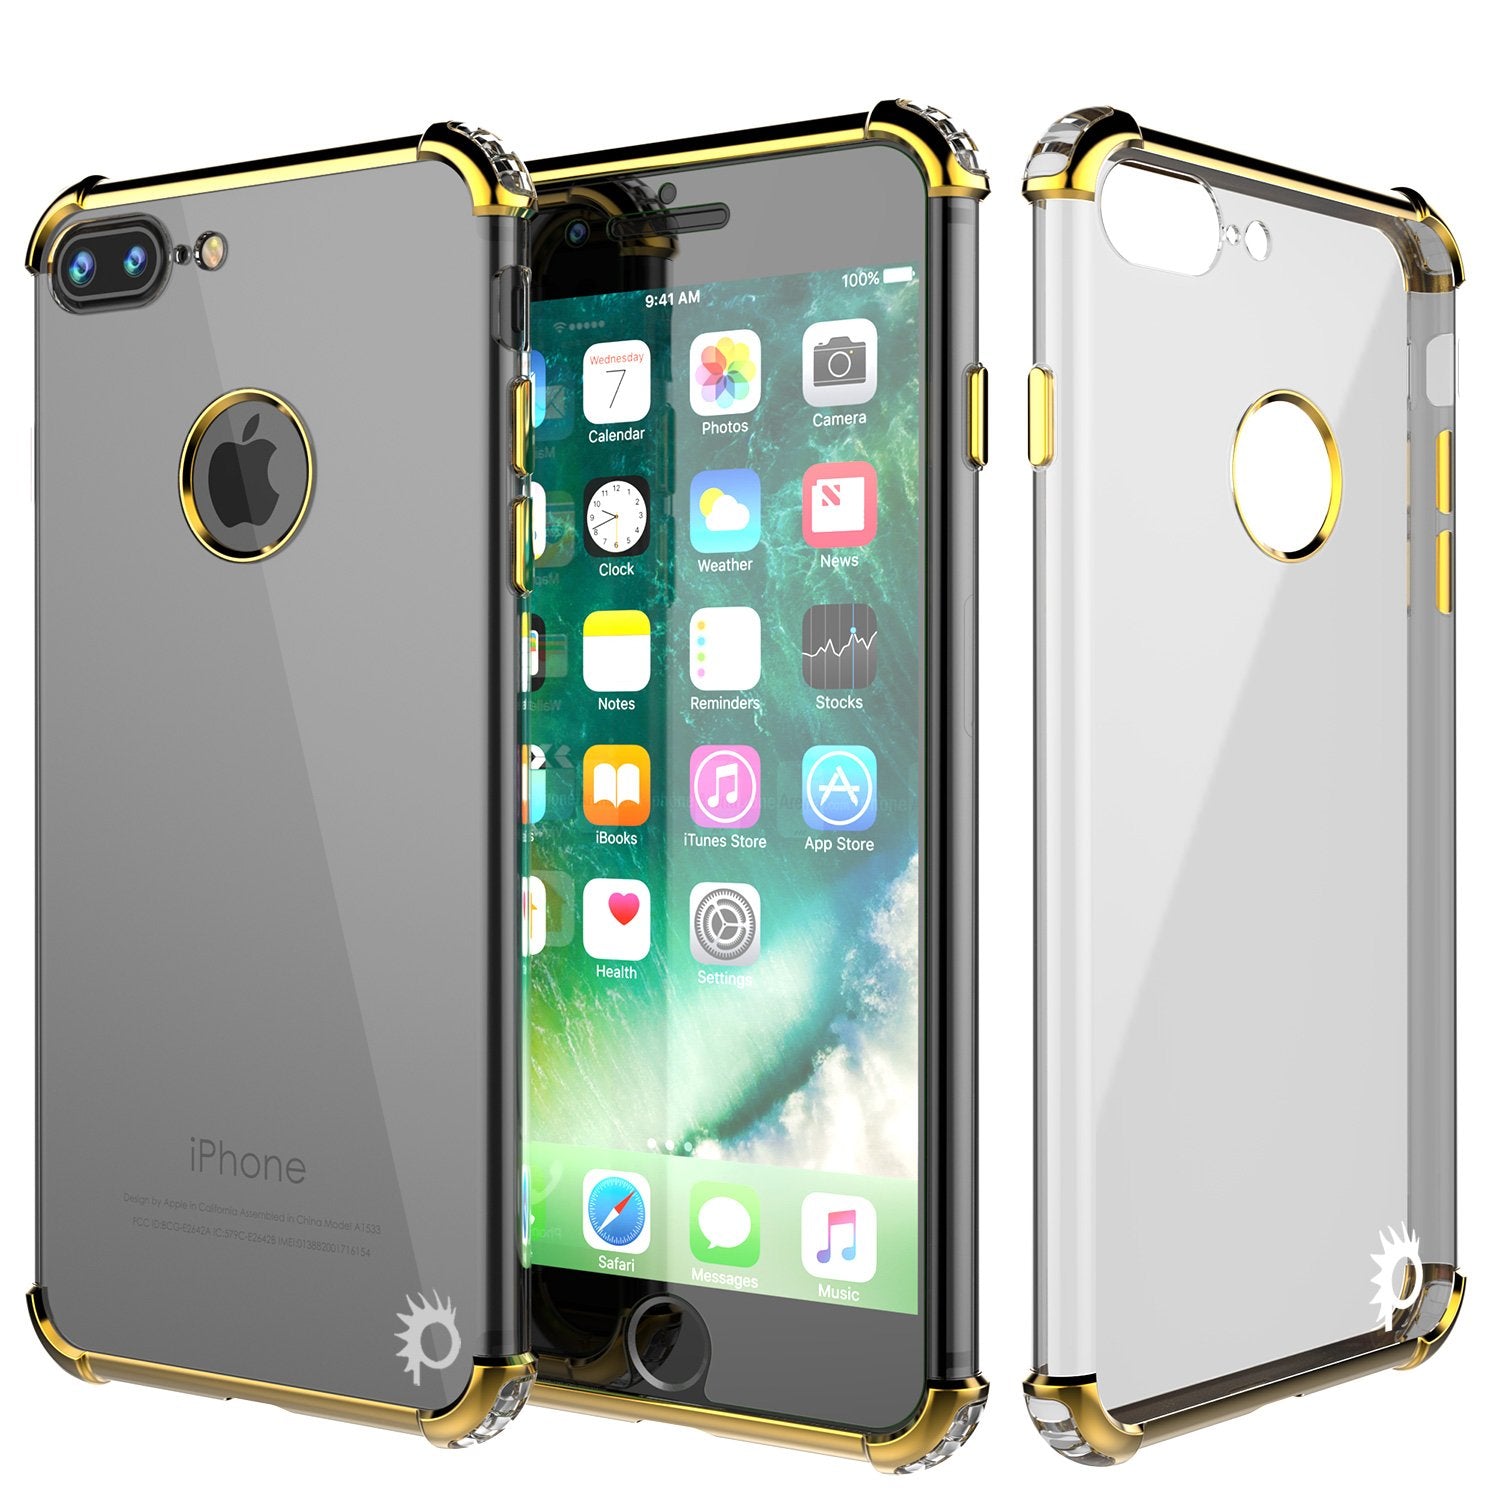 iPhone 7 PLUS Case, Punkcase [BLAZE SERIES] Protective Cover W/ PunkShield Screen Protector [Shockproof] [Slim Fit] for Apple iPhone 7/8/6/6s PLUS [Gold]